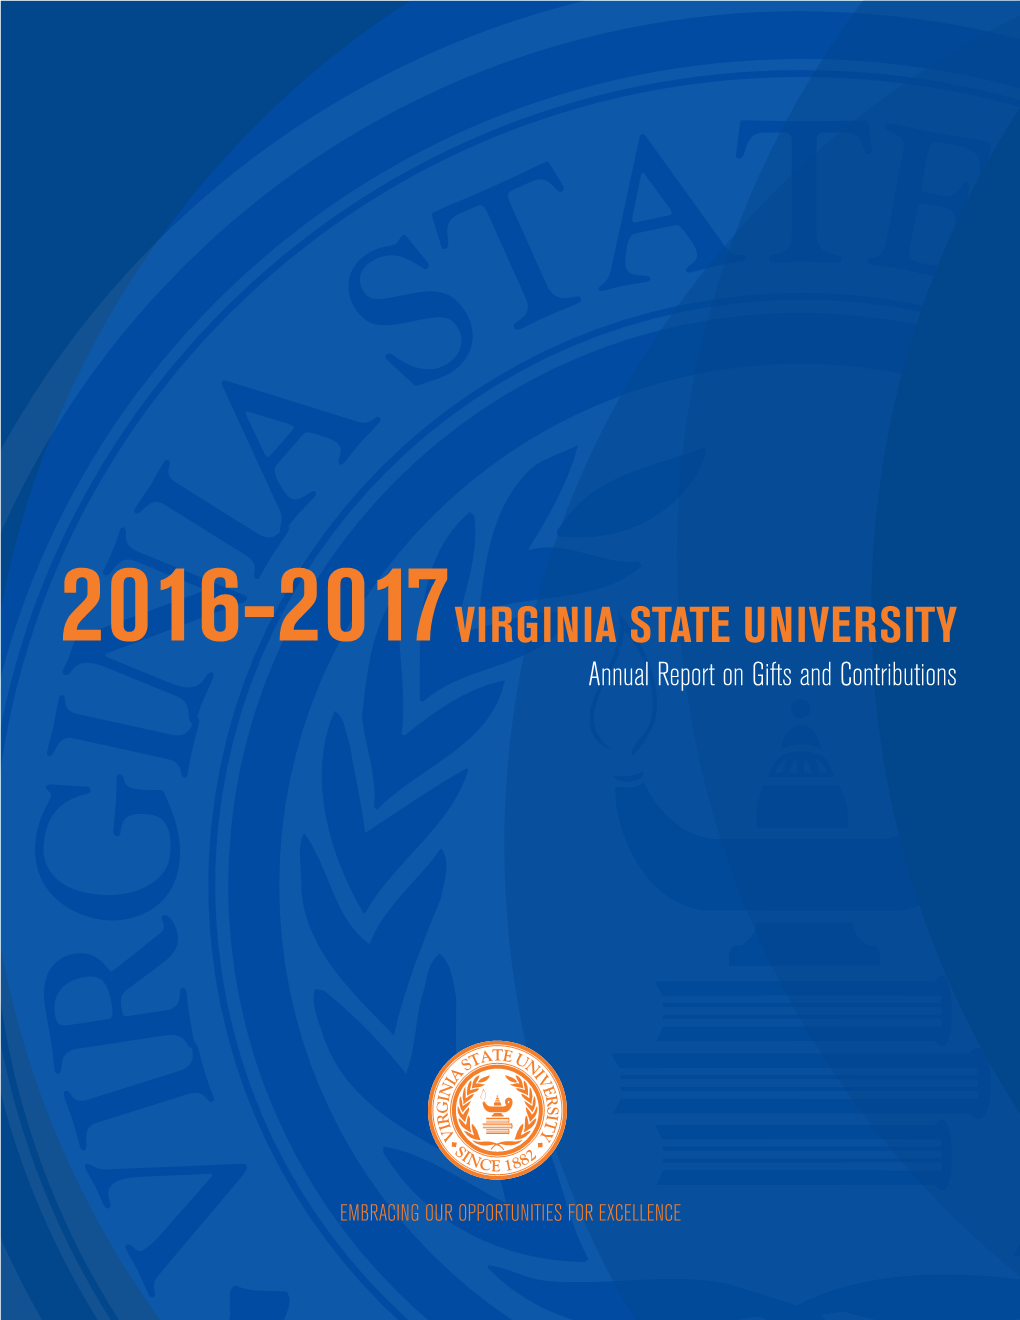 2016-2017VIRGINIA STATE UNIVERSITY Annual Report on Gifts and Contributions